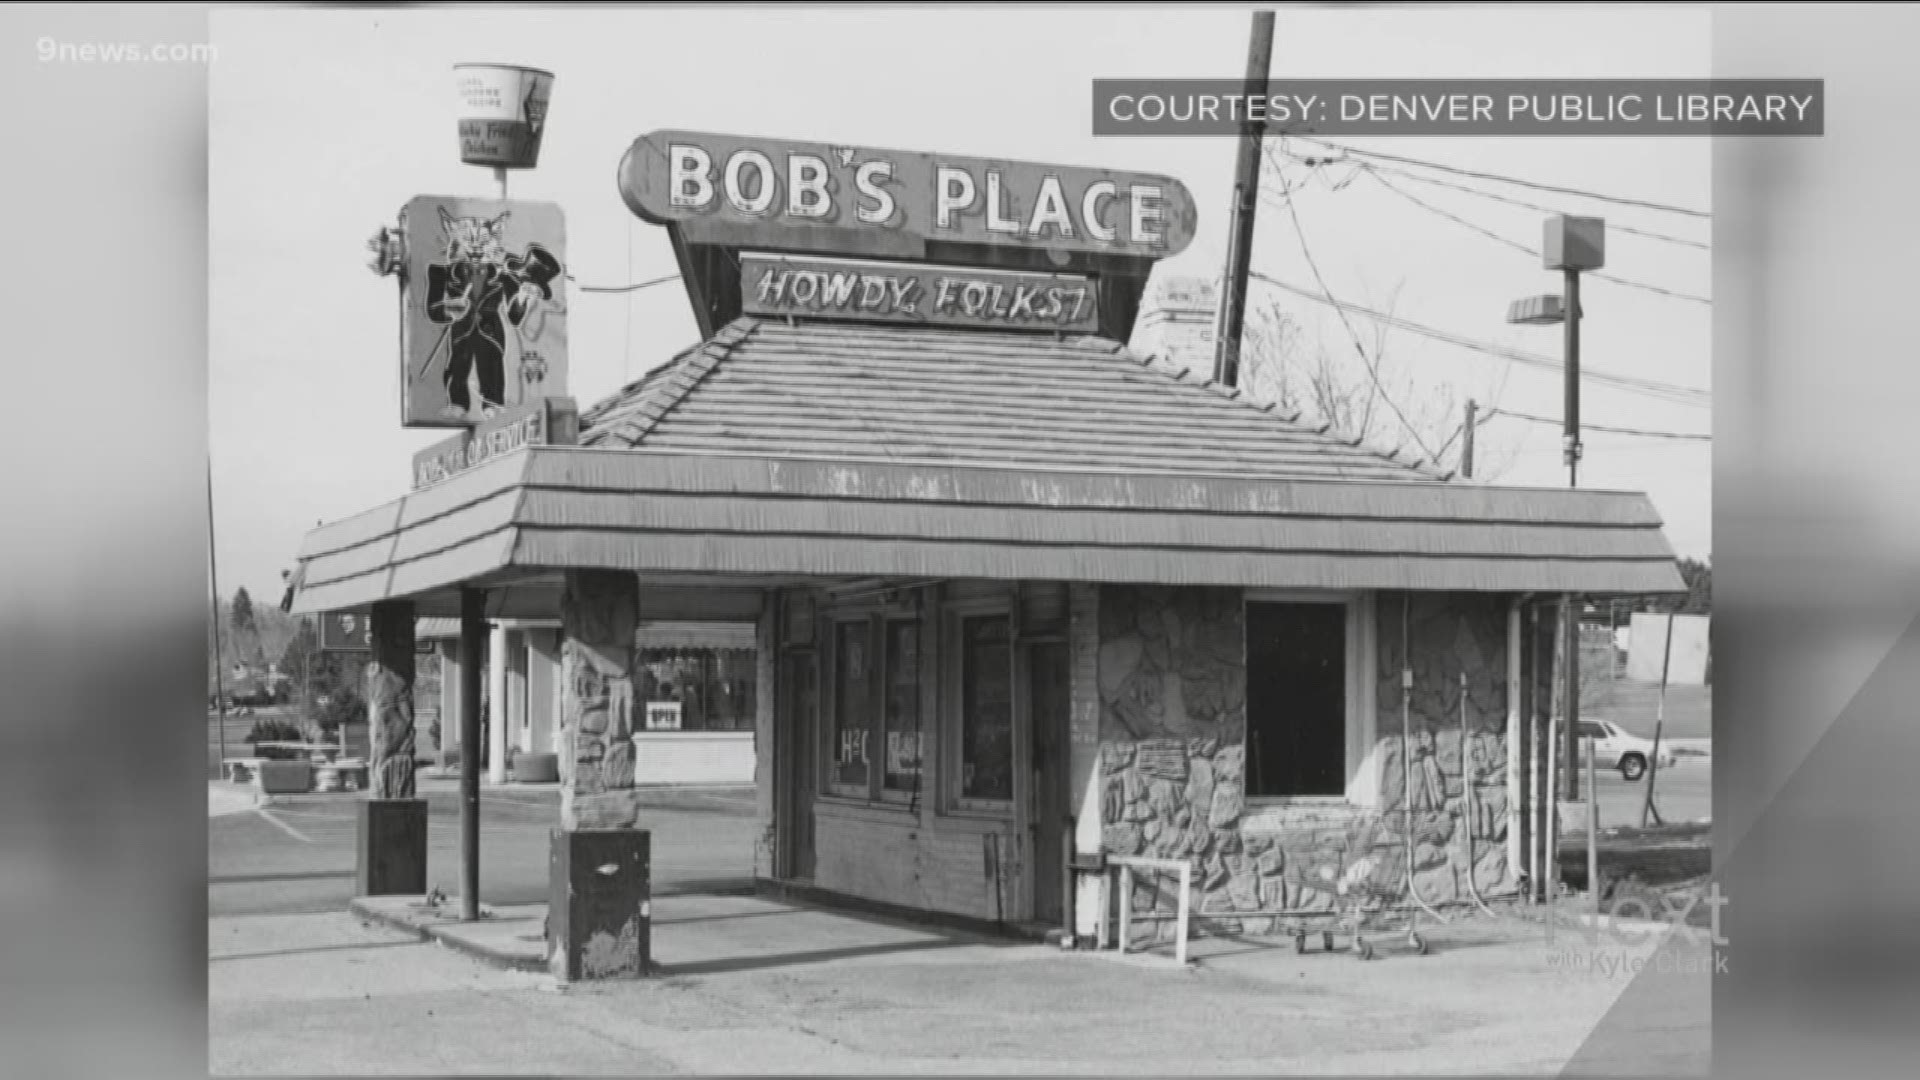 A gas station doesn't usually spark emotional memories, but Bob's Place is pretty memorable. So we look back at the history of the iconic fill station.